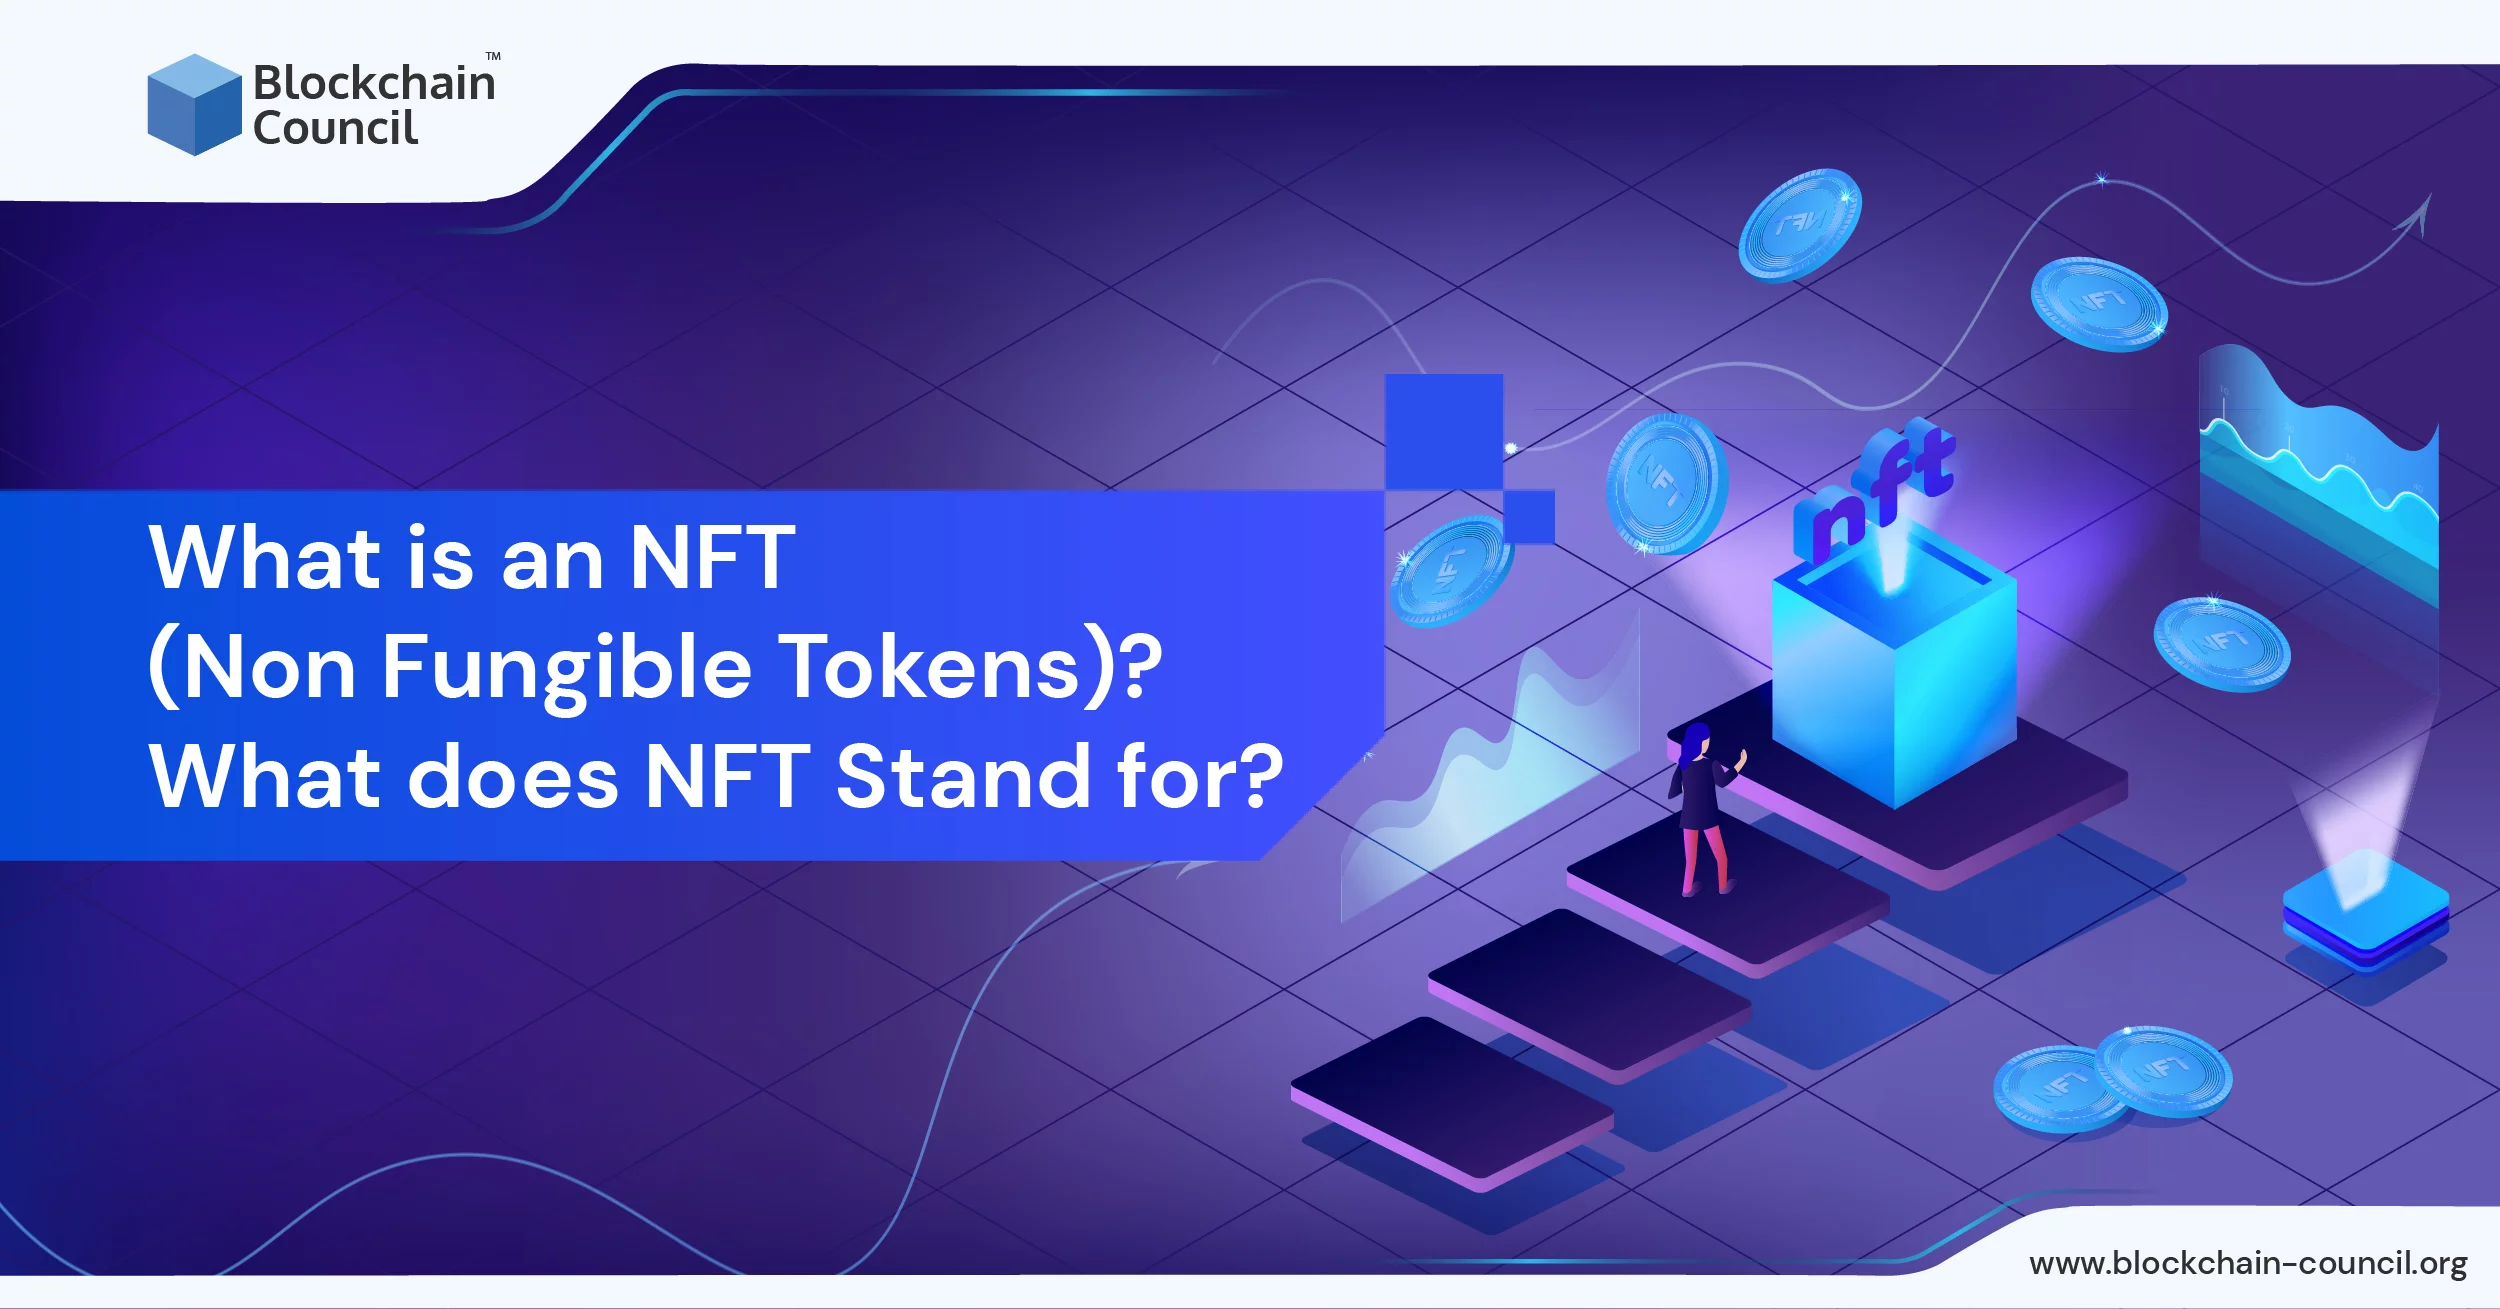 What is an NFT (Non Fungible Tokens)? What does NFT Stand for?